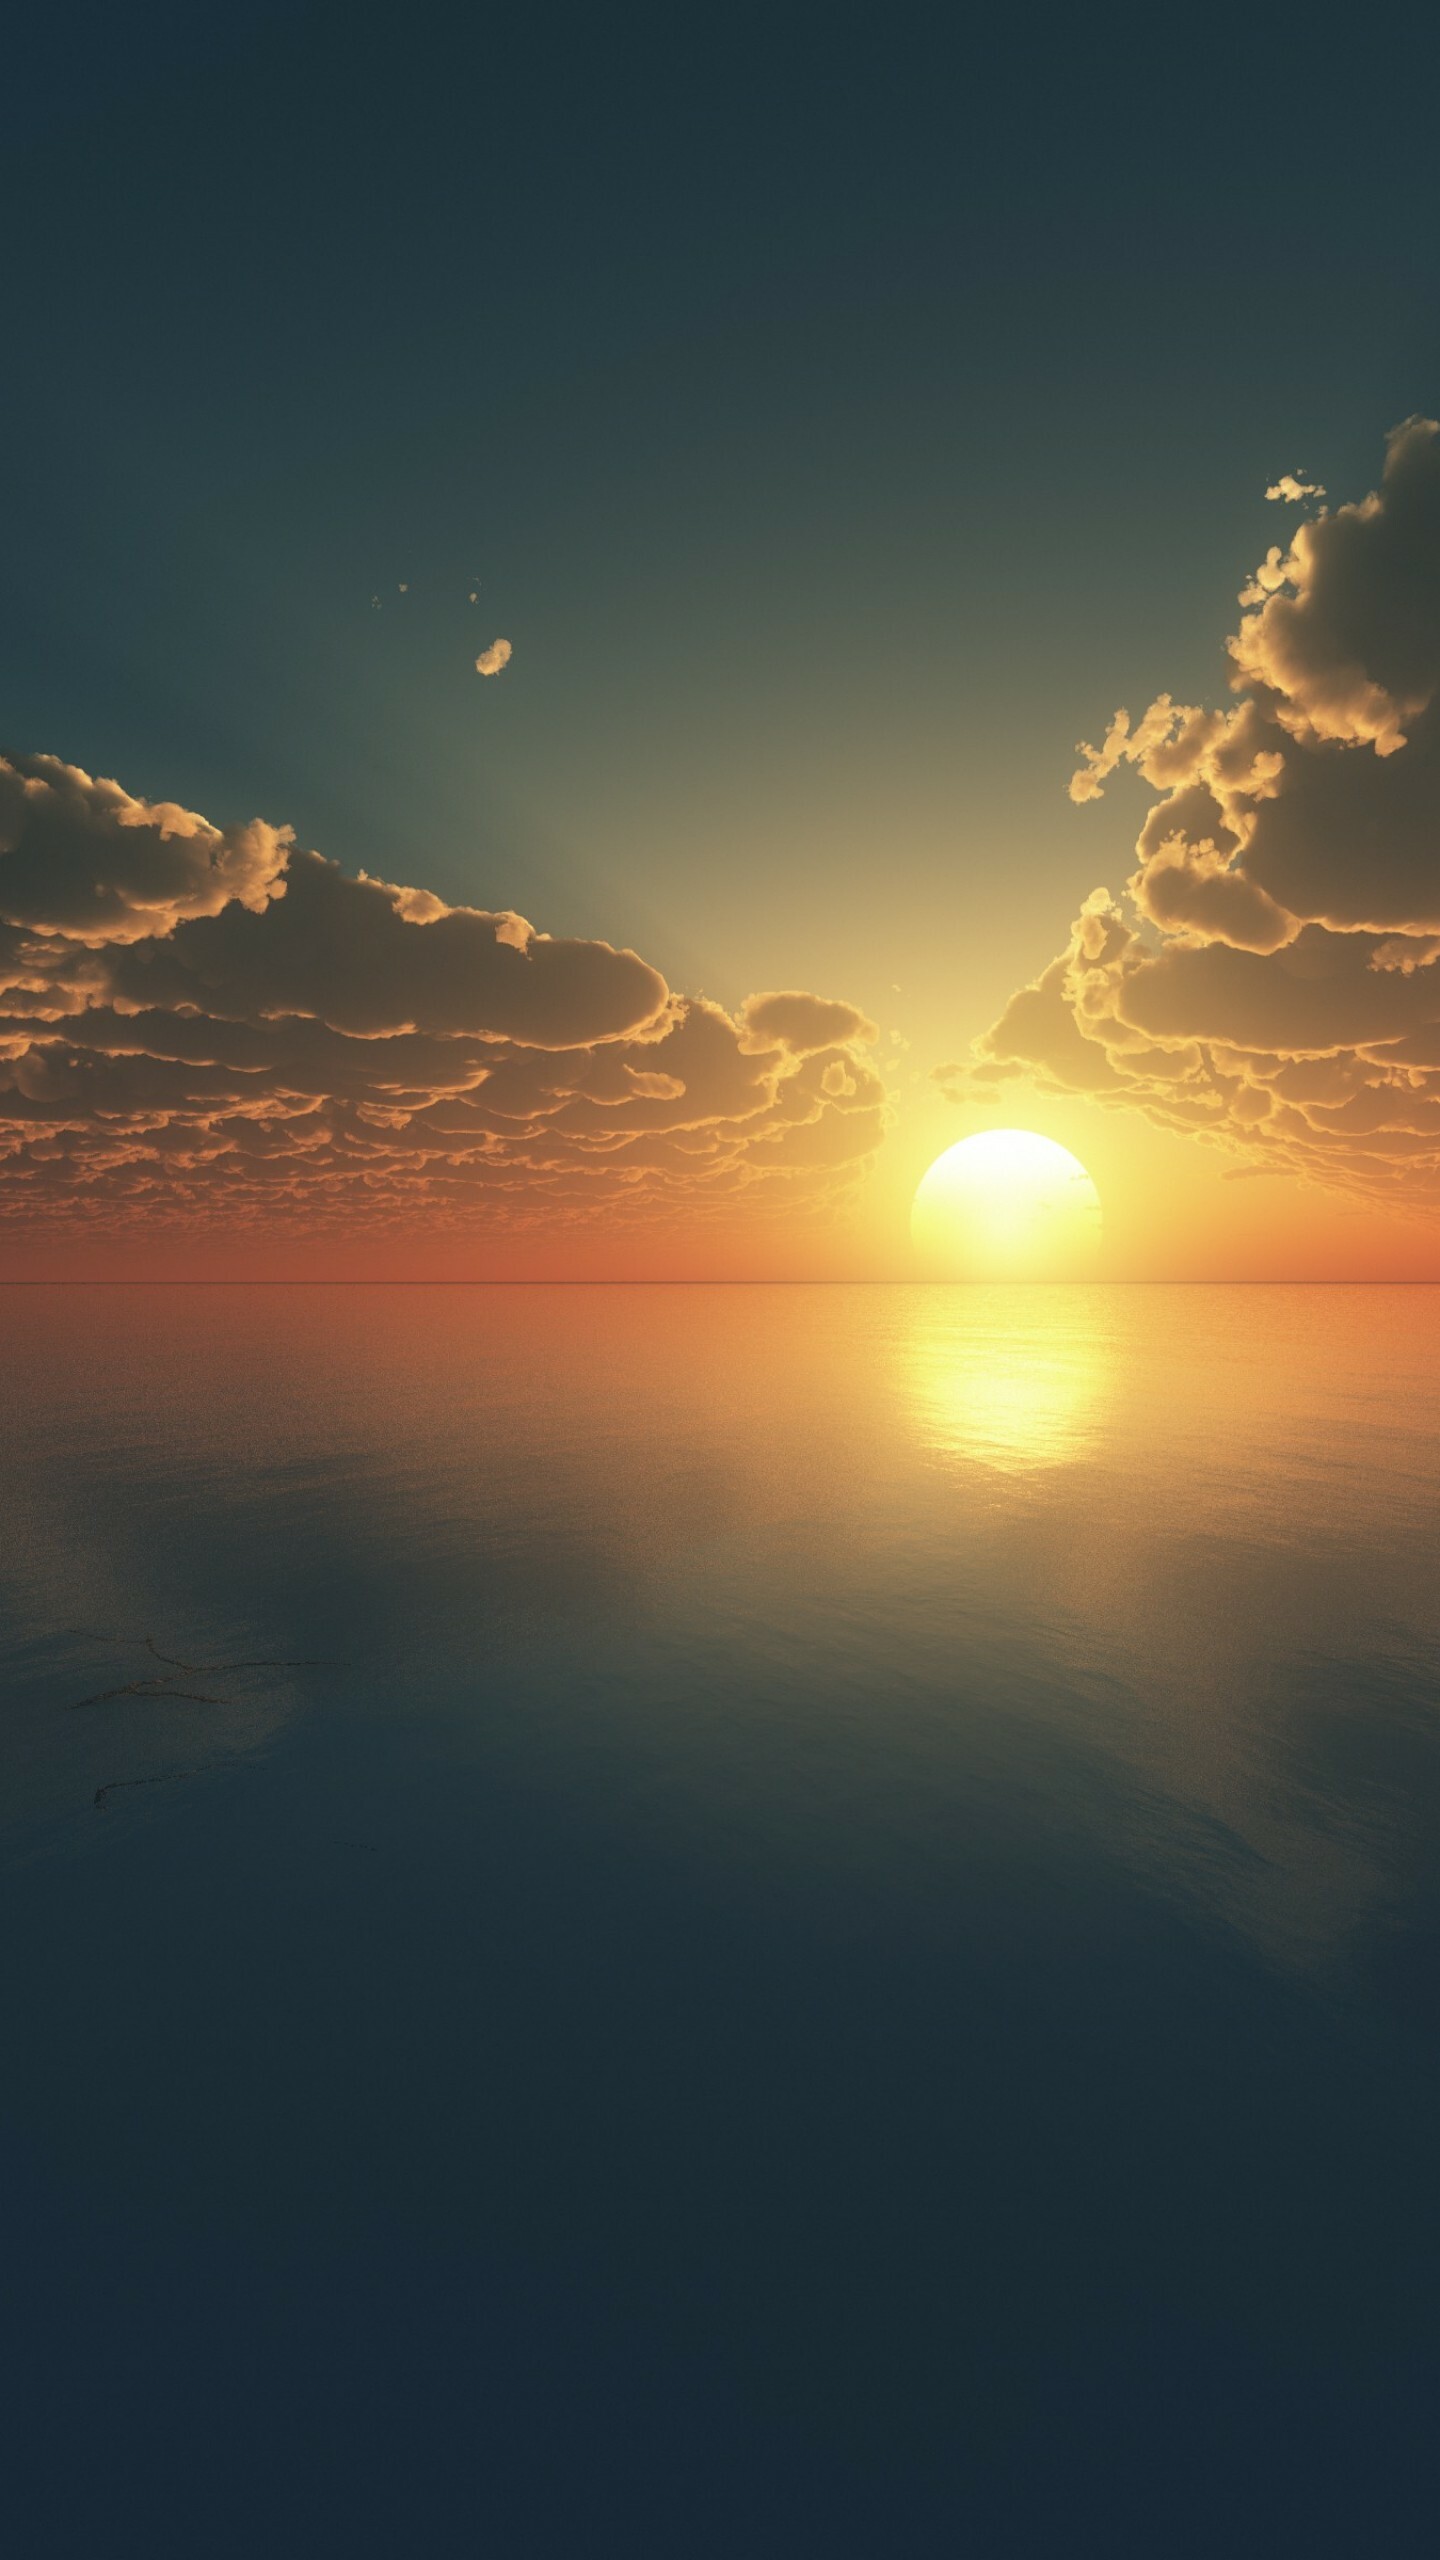 Sunset: The sun disappearing over the horizon, The broad expanse of water reflecting clouds. 1440x2560 HD Background.